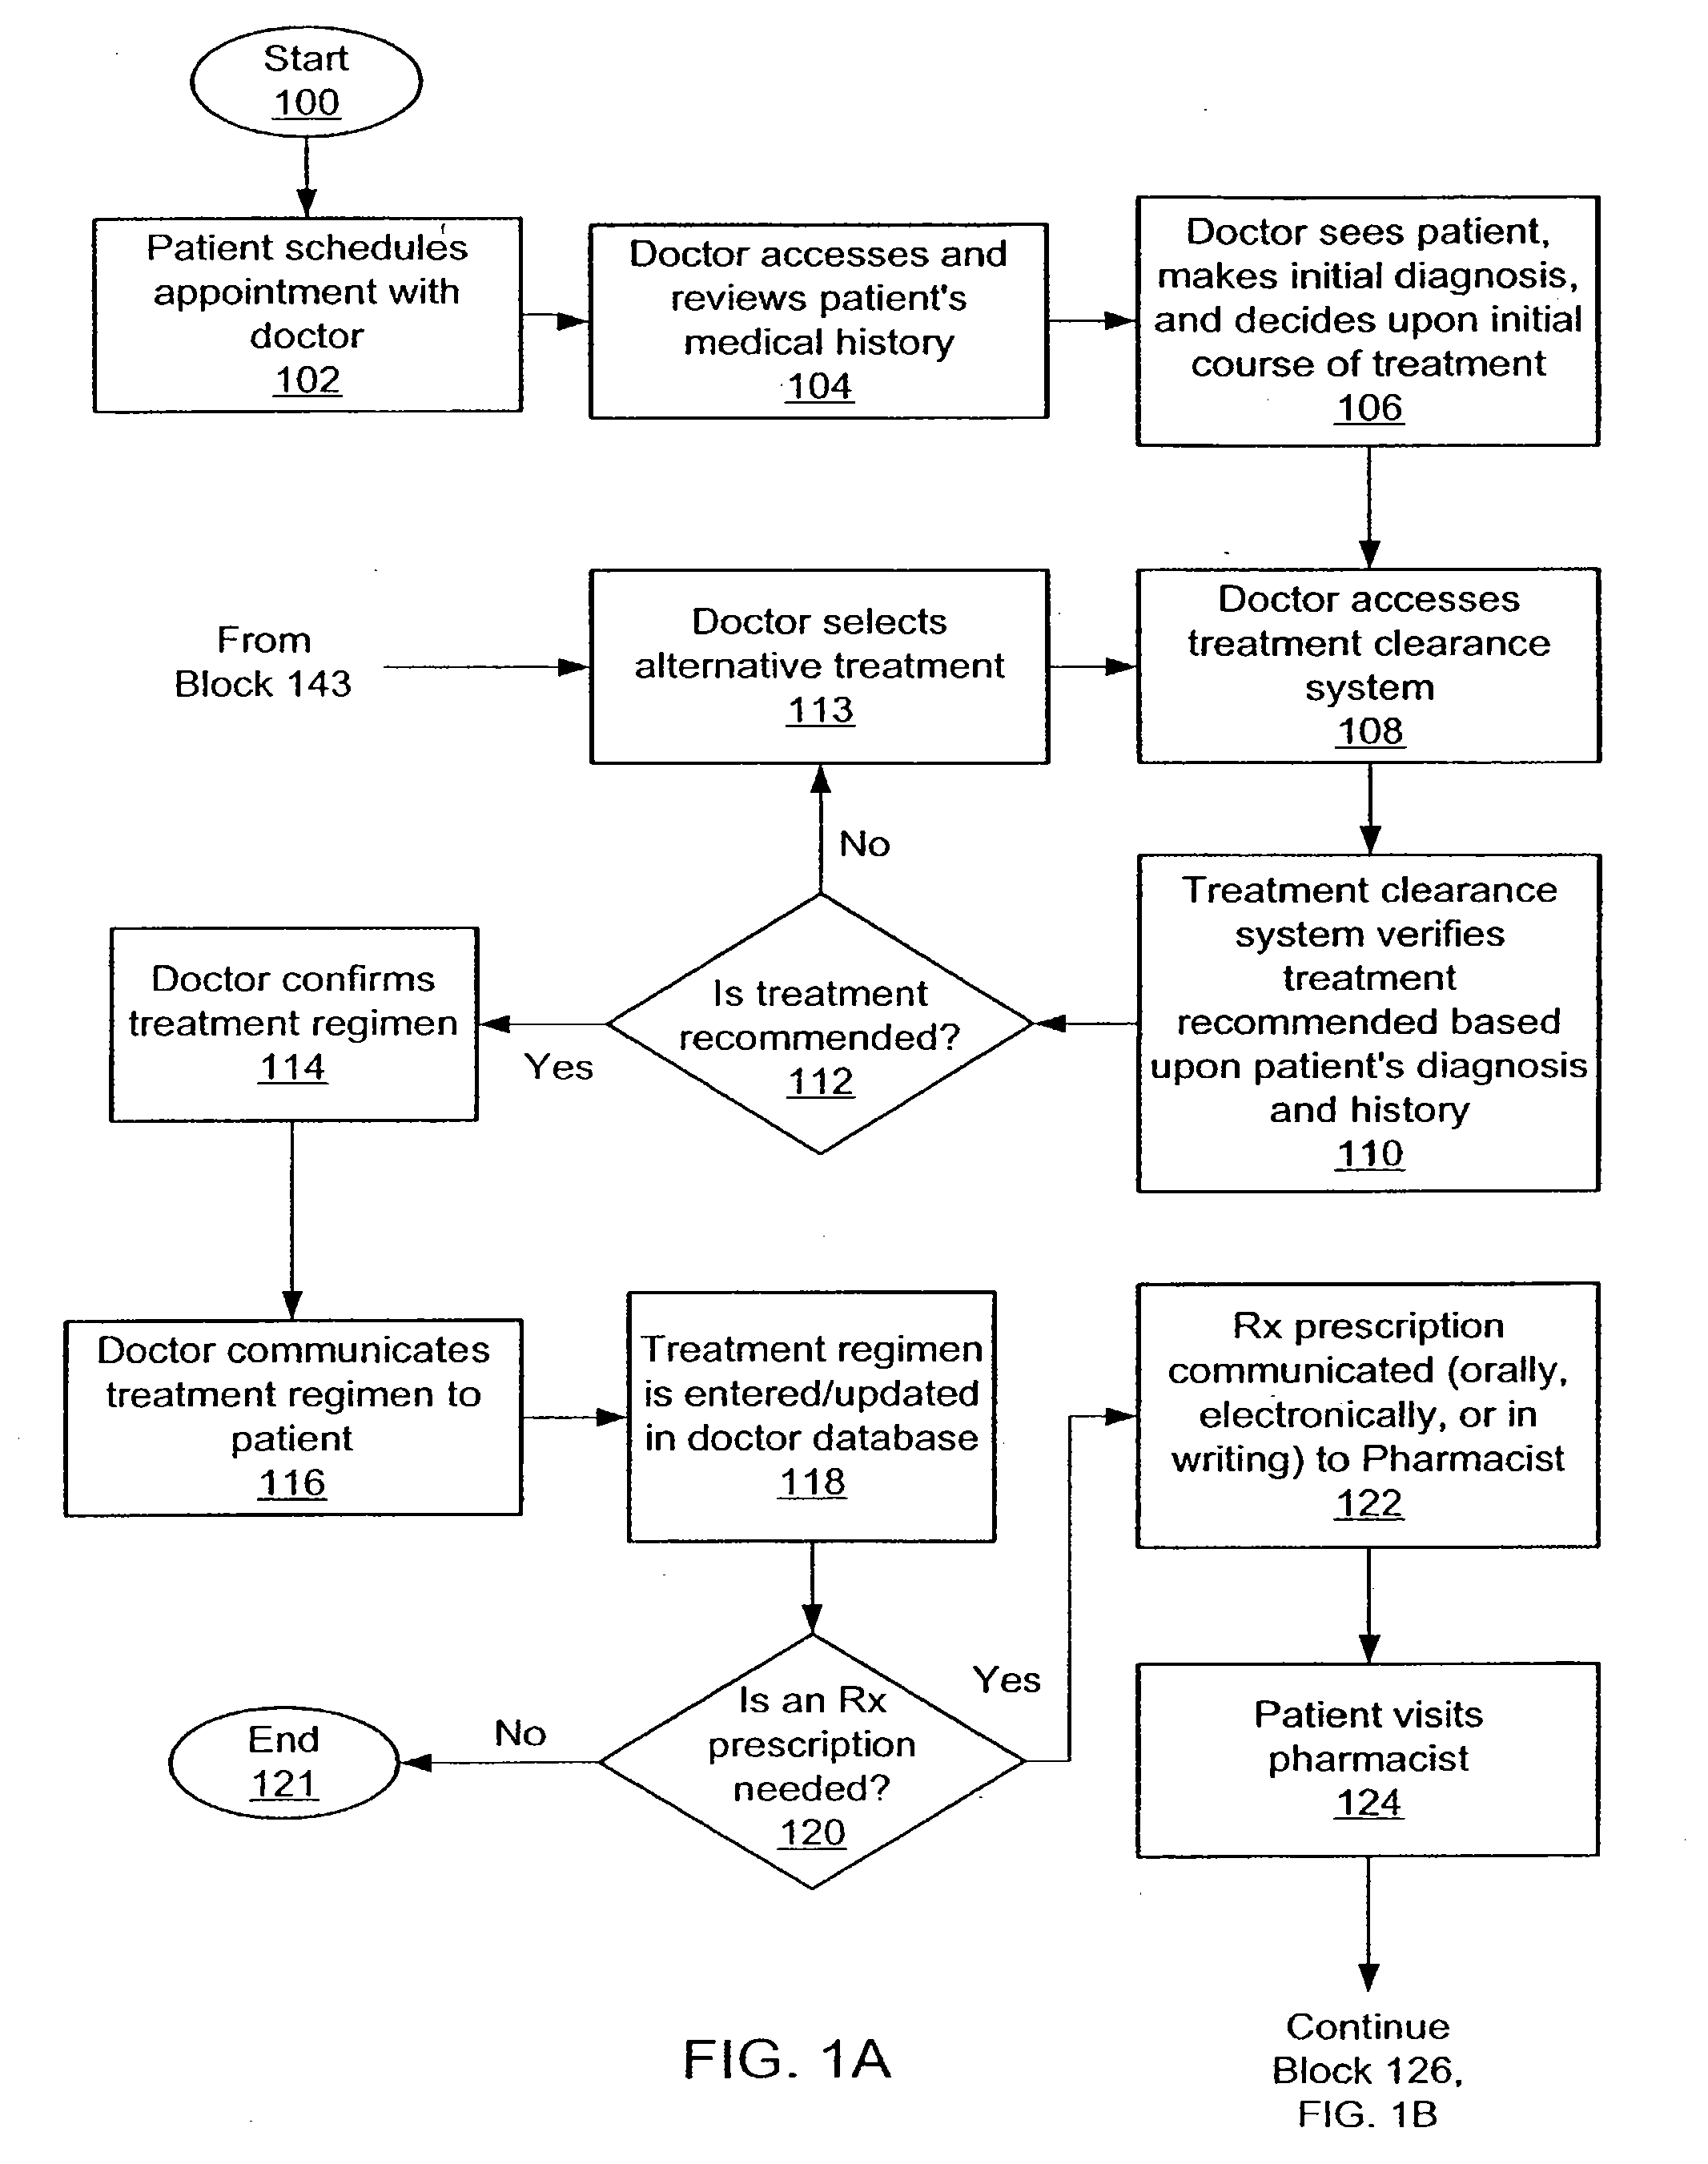 Apparatus, device and method for prescribing, administering and monitoring a treatment regimen for a patient